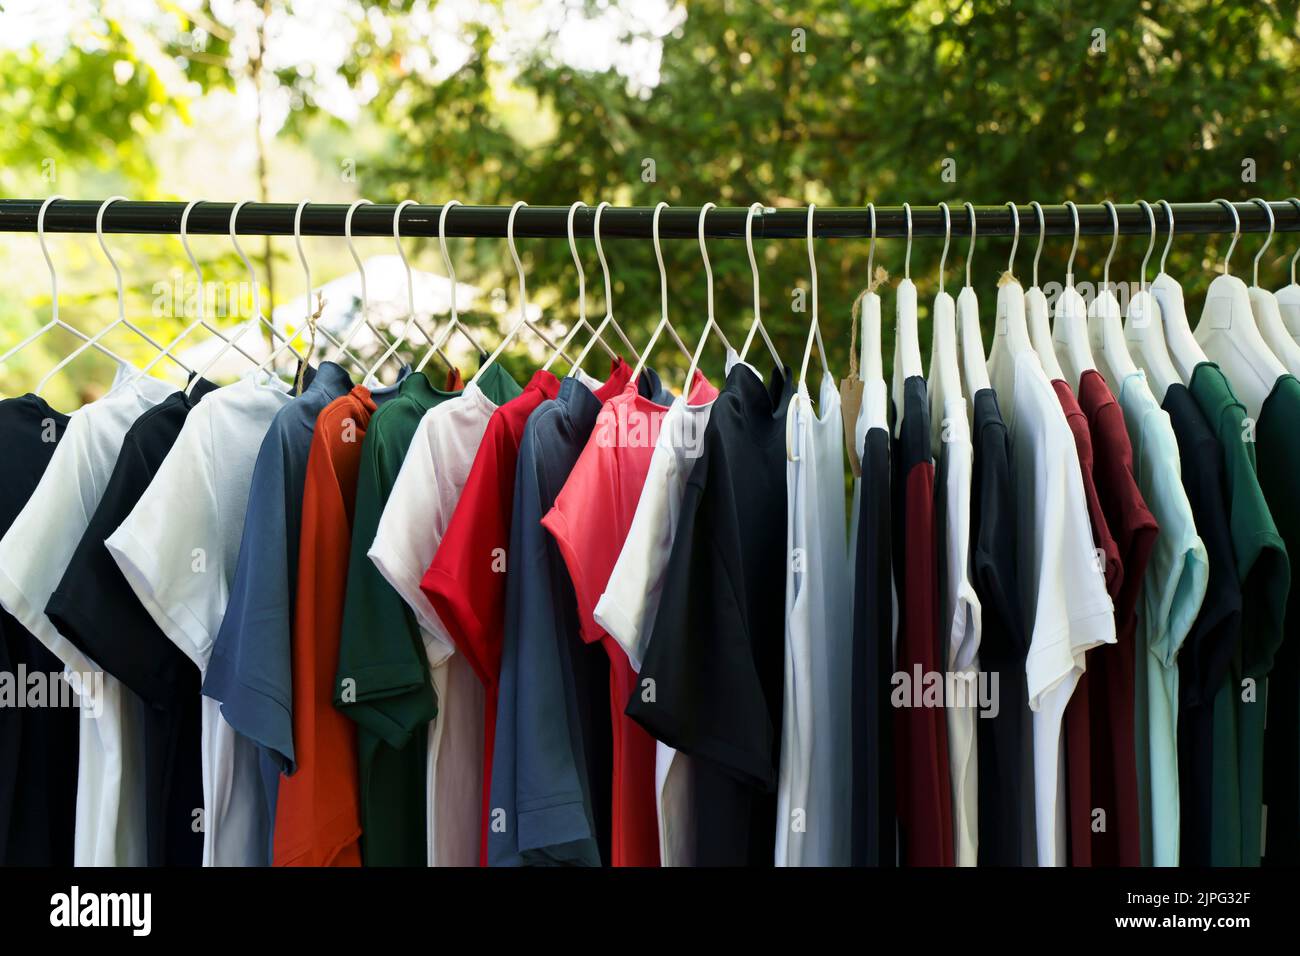 Row of jackets on hangers, clothing store, fabric Stock Photo by NomadSoul1